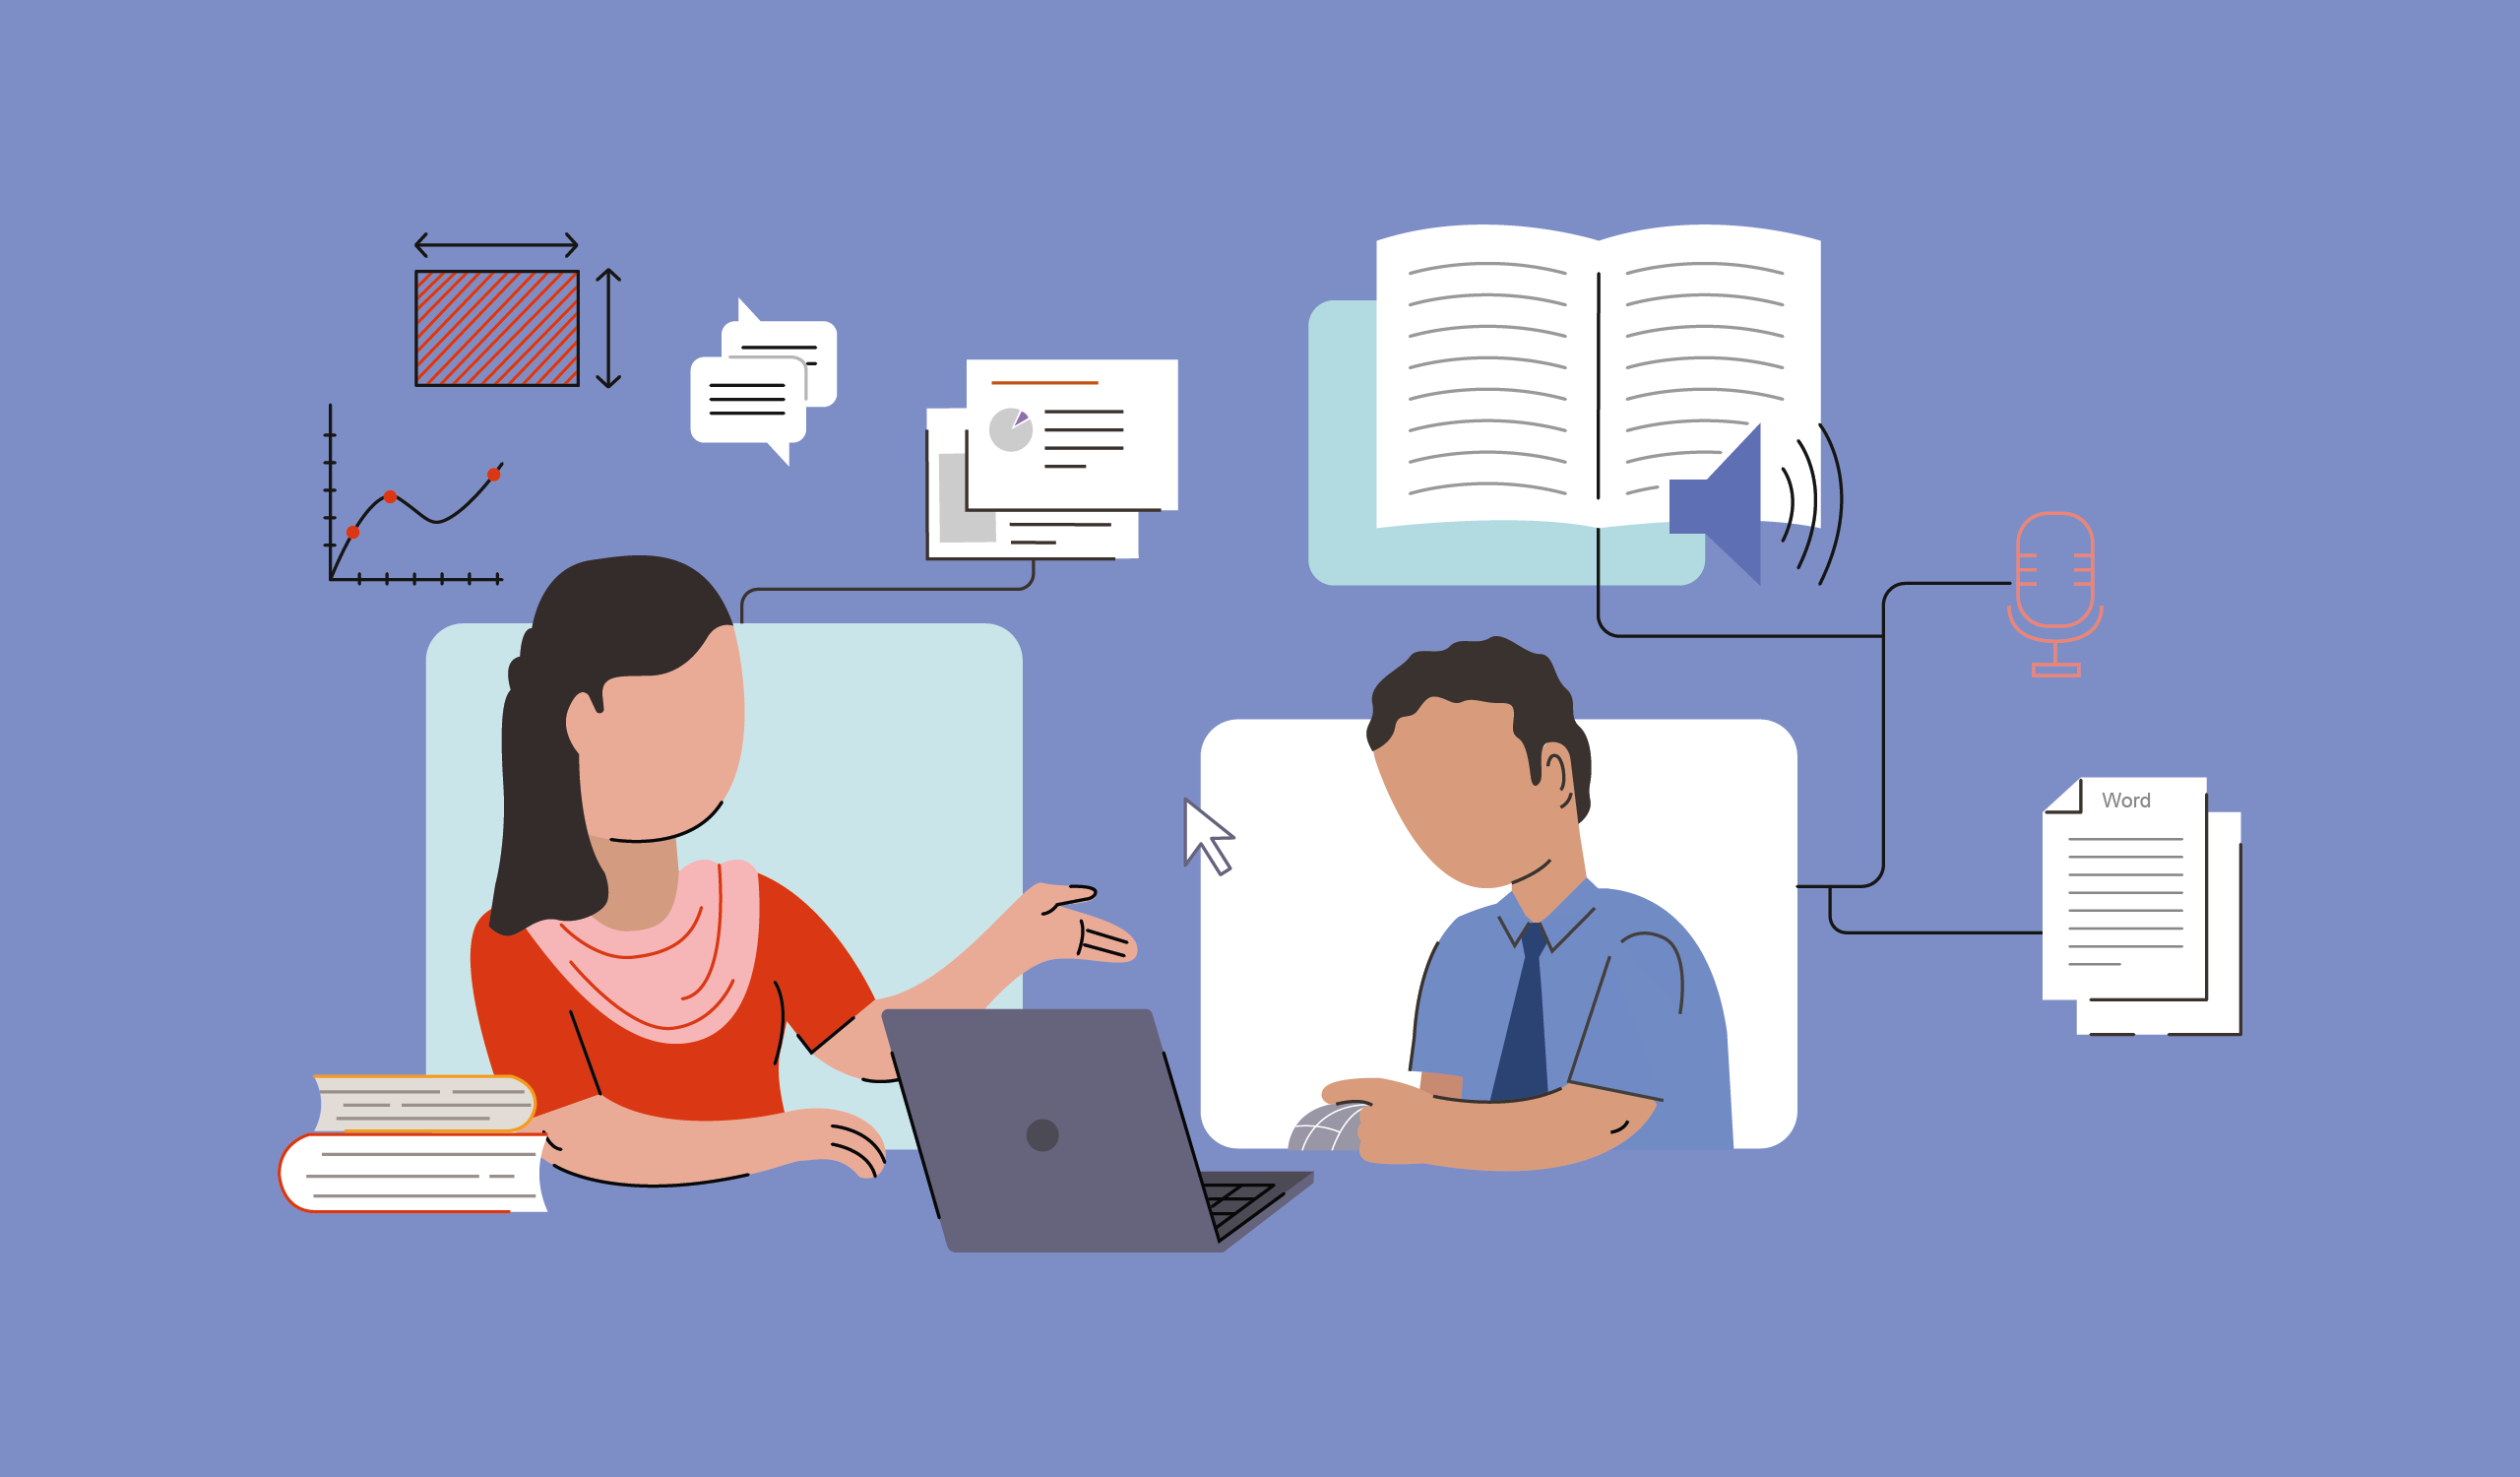 an illustration of a teacher and student using digital solutions for education